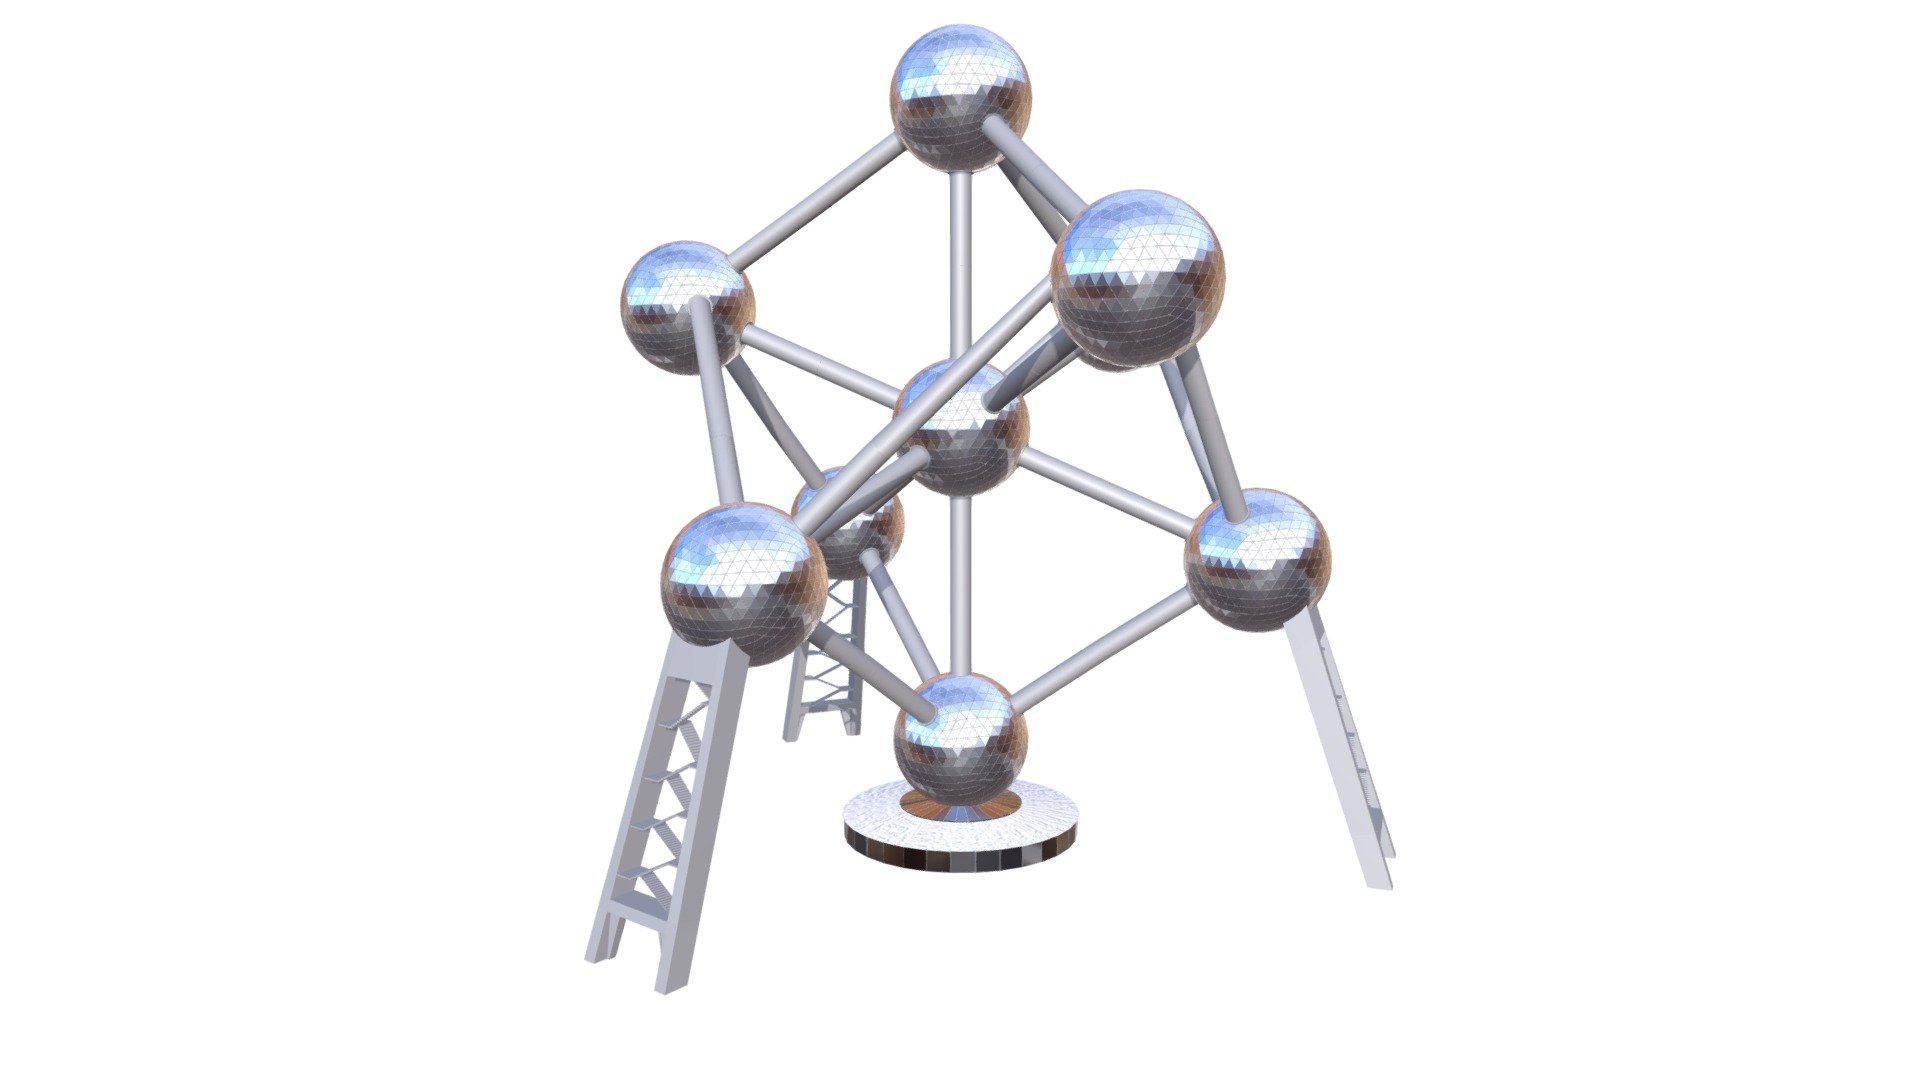 3D model of Atomium in Belgium, Brussel.

Made in Blender.

Medium poly, good quality.

Textures and materials included.



The Atomium is a landmark building in Brussels, originally constructed for the 1958 Brussels World’s Fair. It is located on the Heysel Plateau, where the exhibition took place. It is now a museum. Designed by the engineer André Waterkeyn and architects André and Jean Polak, it stands 102 m tall 3d model